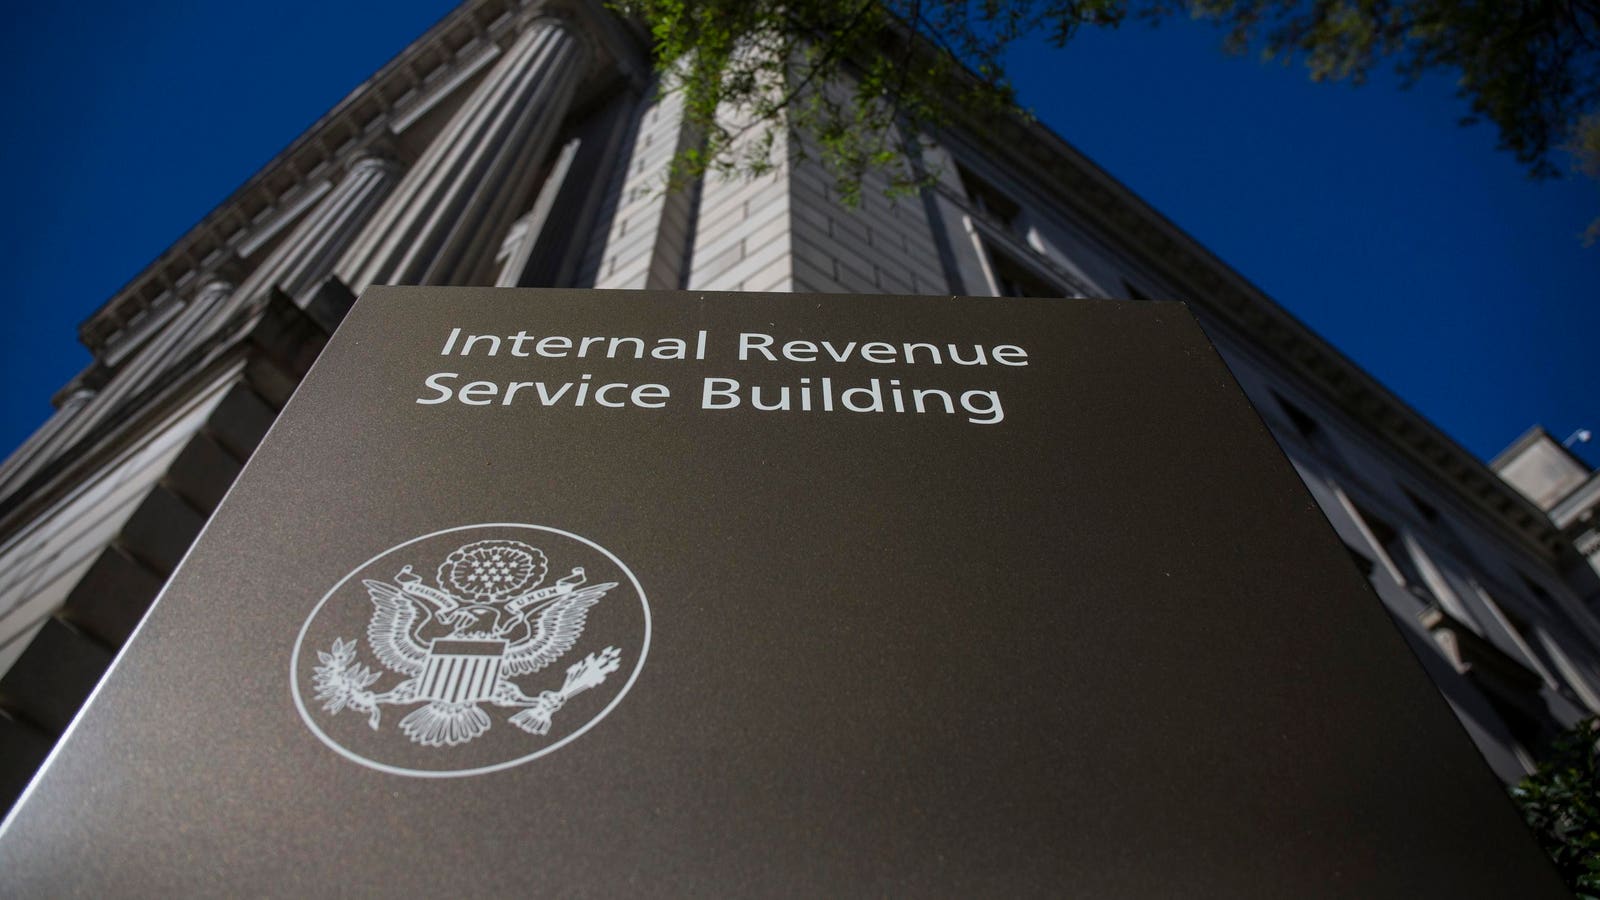 IRS Likely To Increase Scrutiny On The Puerto Rico Act 22 Tax Break